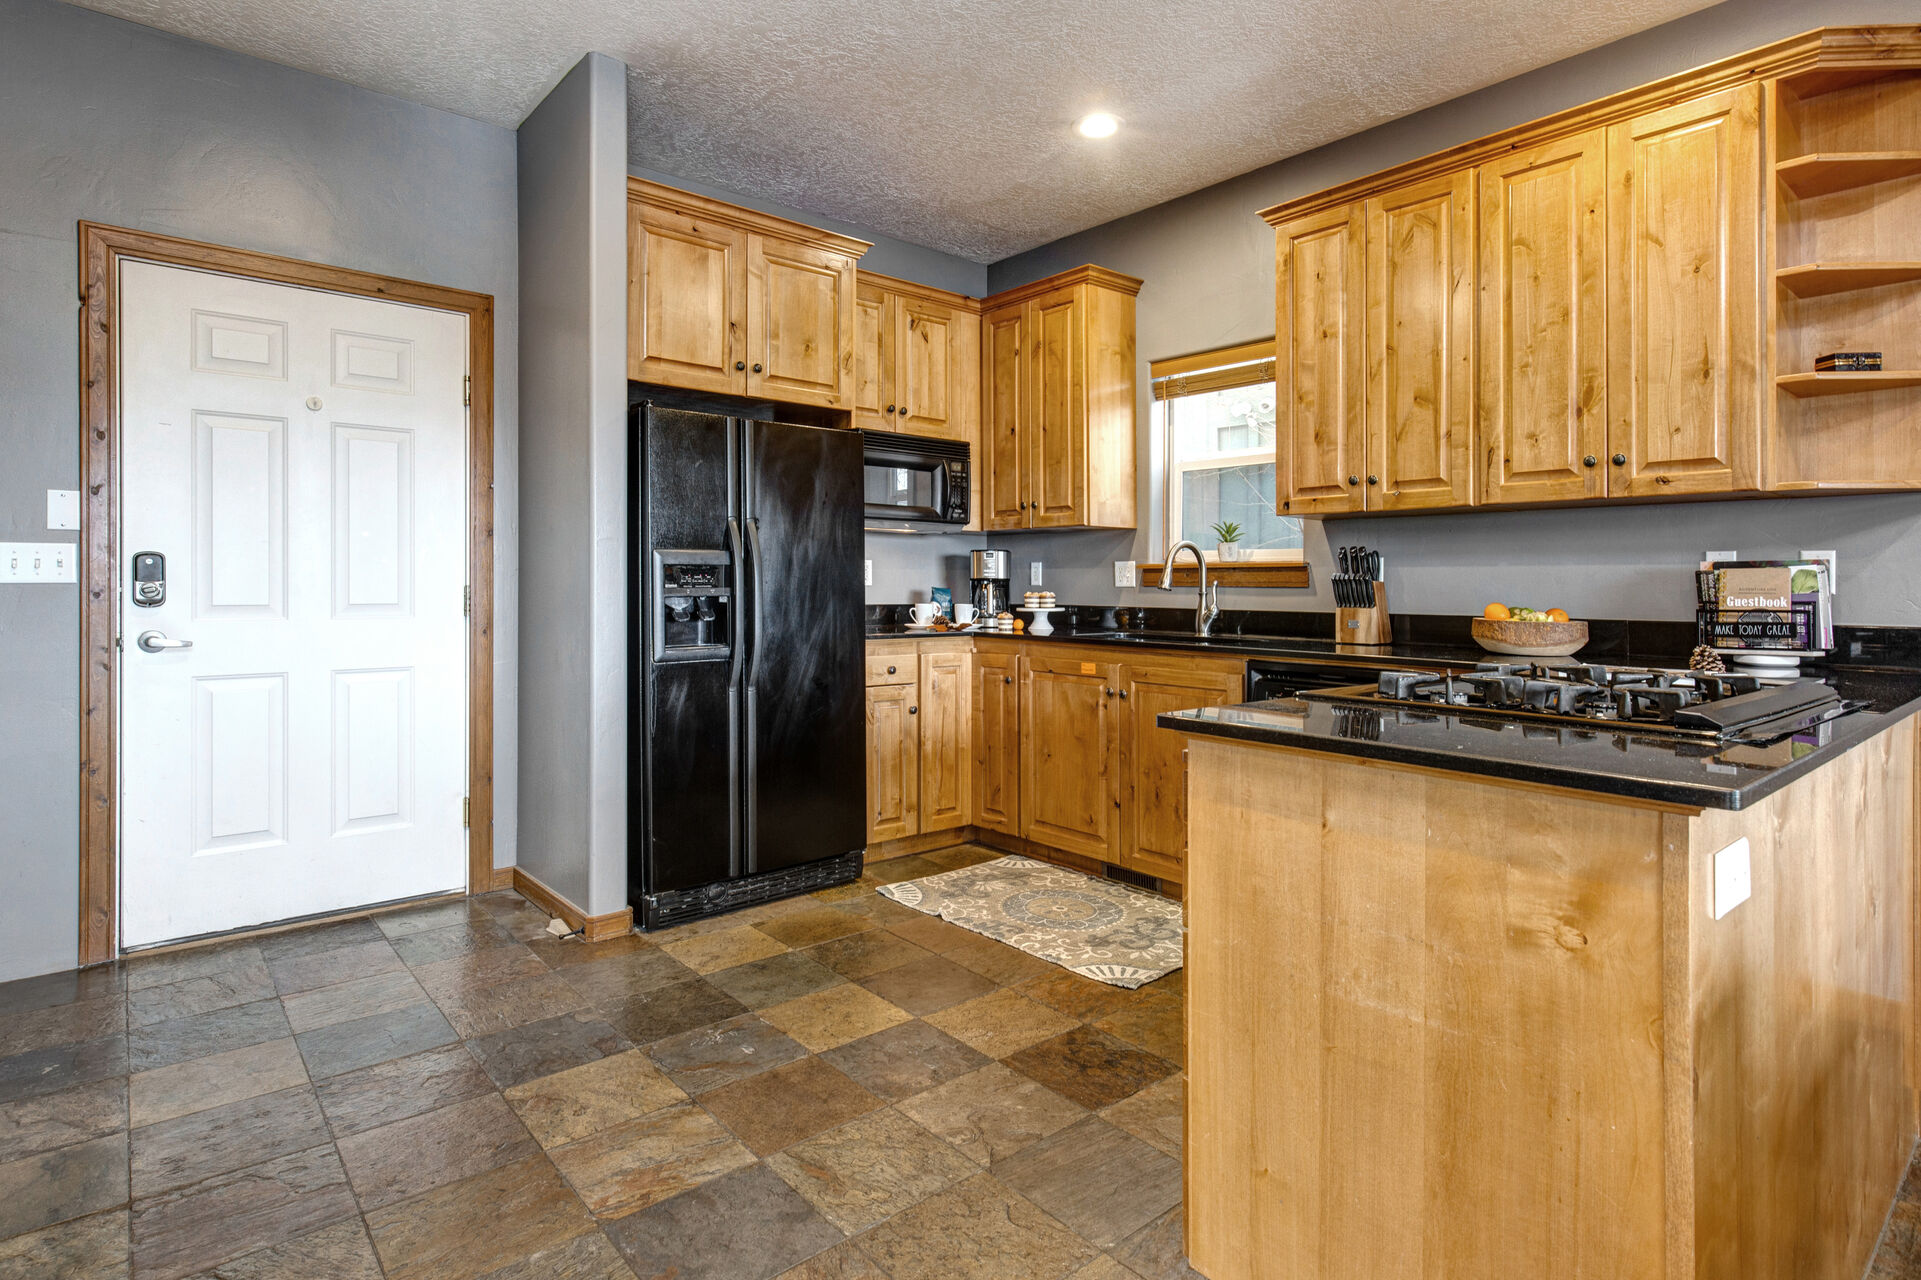 Fully quipped Kitchen with garage access, beautiful stone countertops, ample space for prep, and built-in ice maker